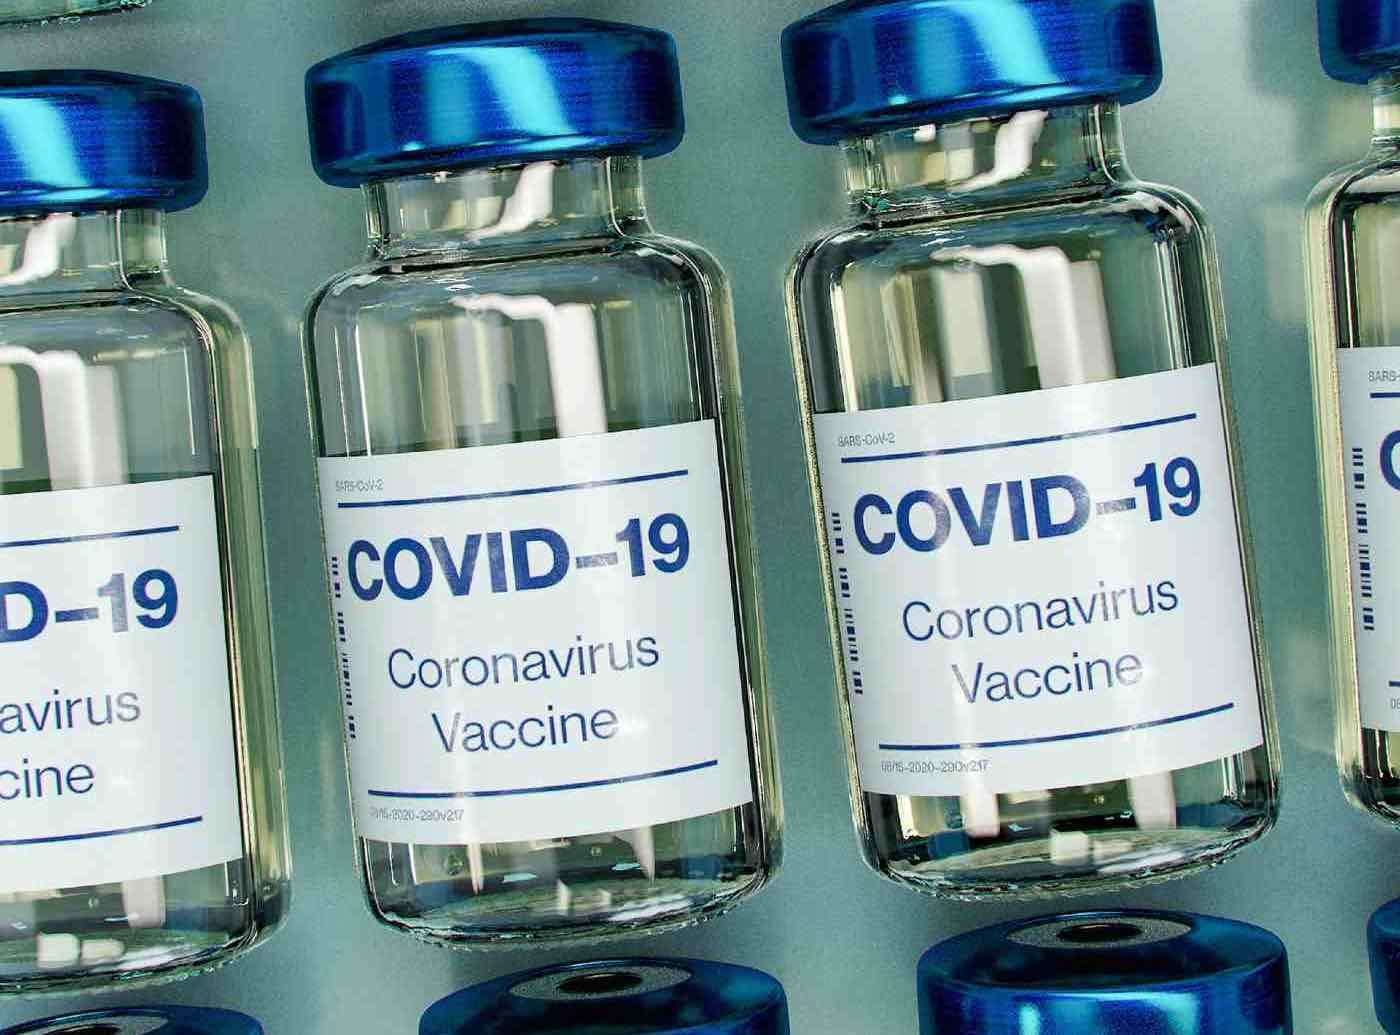 10 Positive COVID Updates From Around the World - 2021 is Looking Brighter 